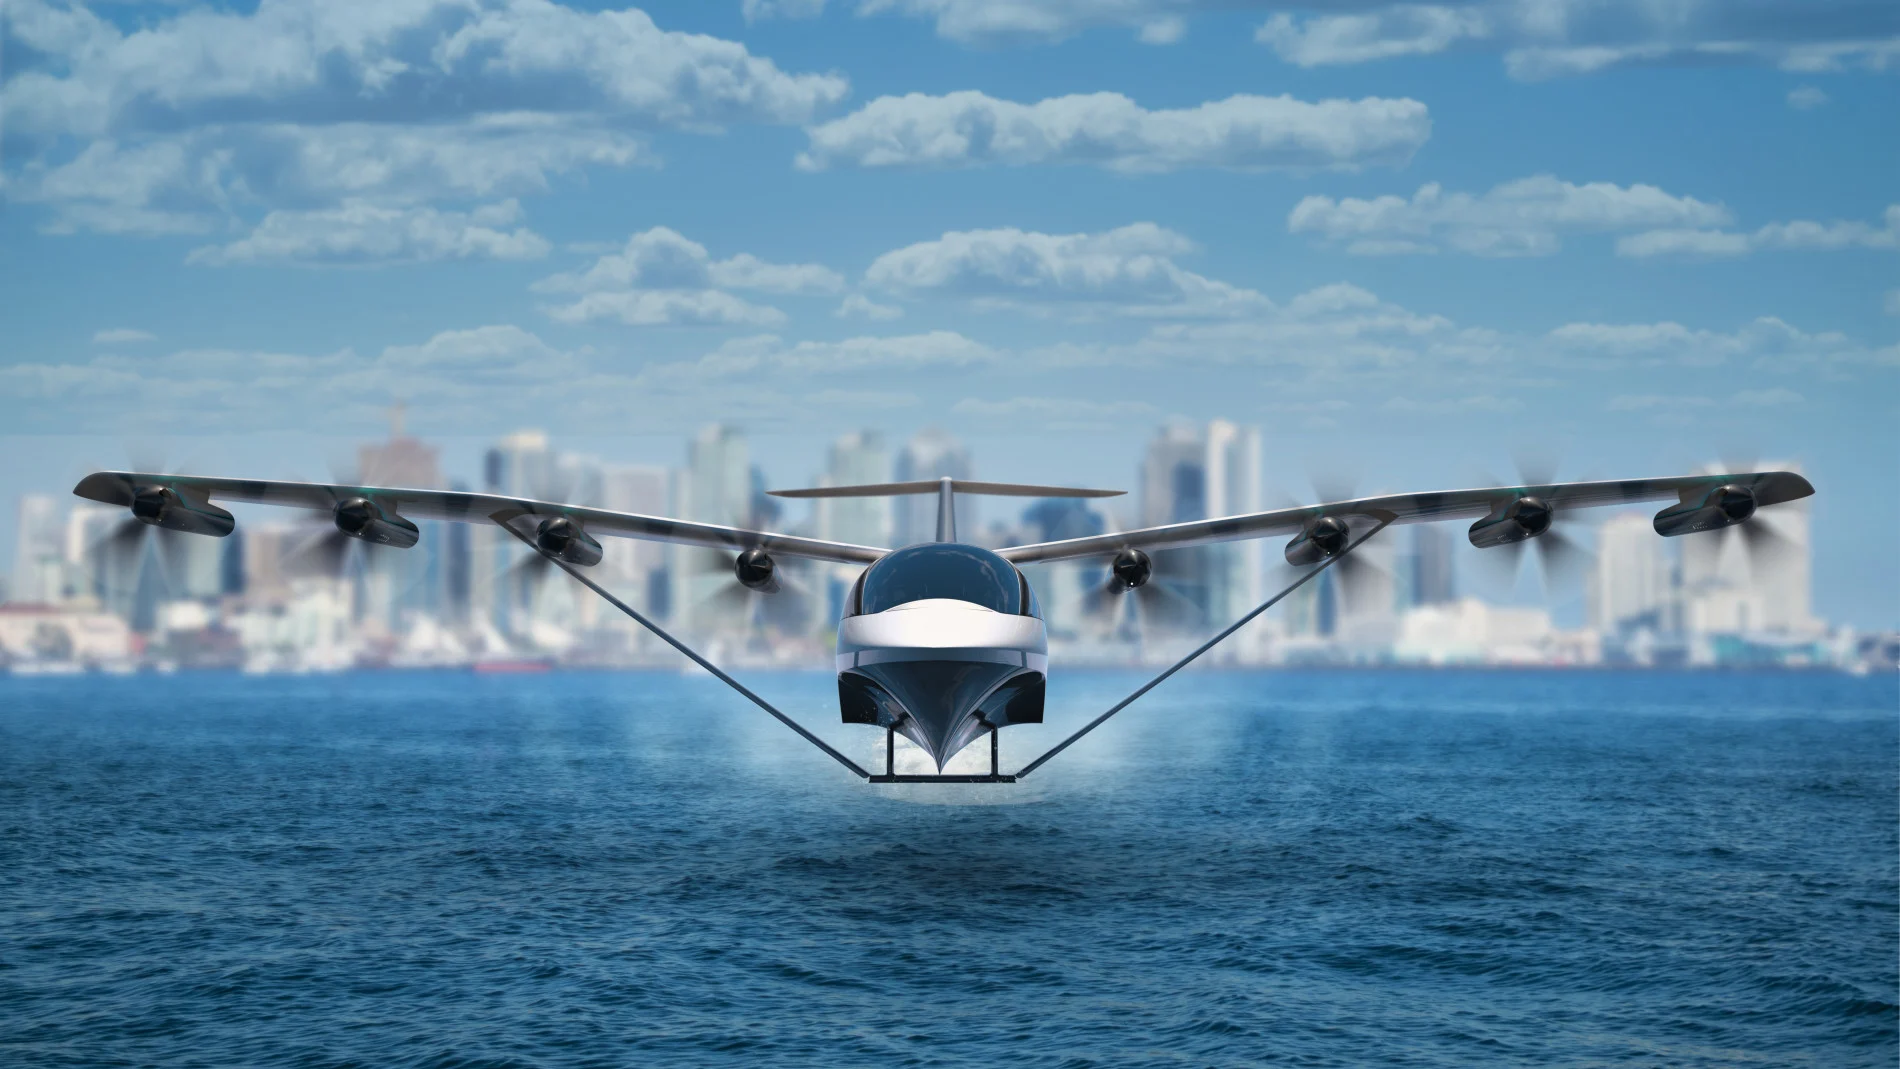 Electric flying ferries set to transport passengers by 2025